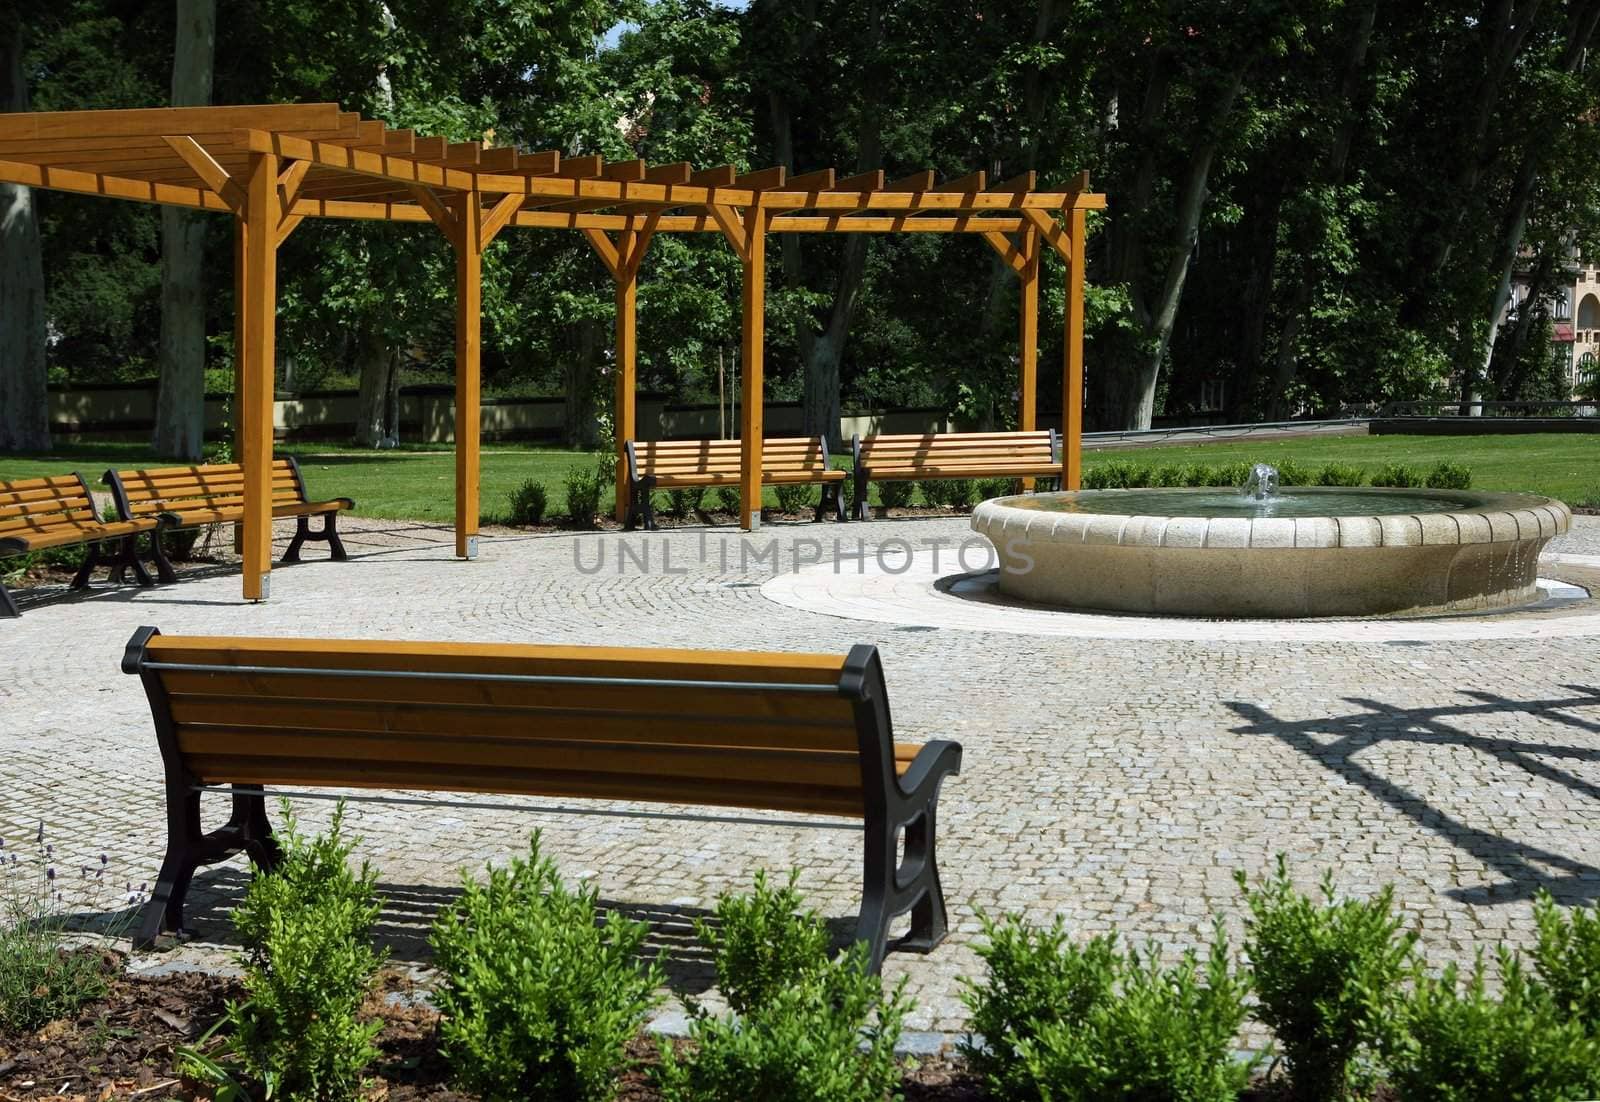 Park with fountain, benches, and wooden construction around